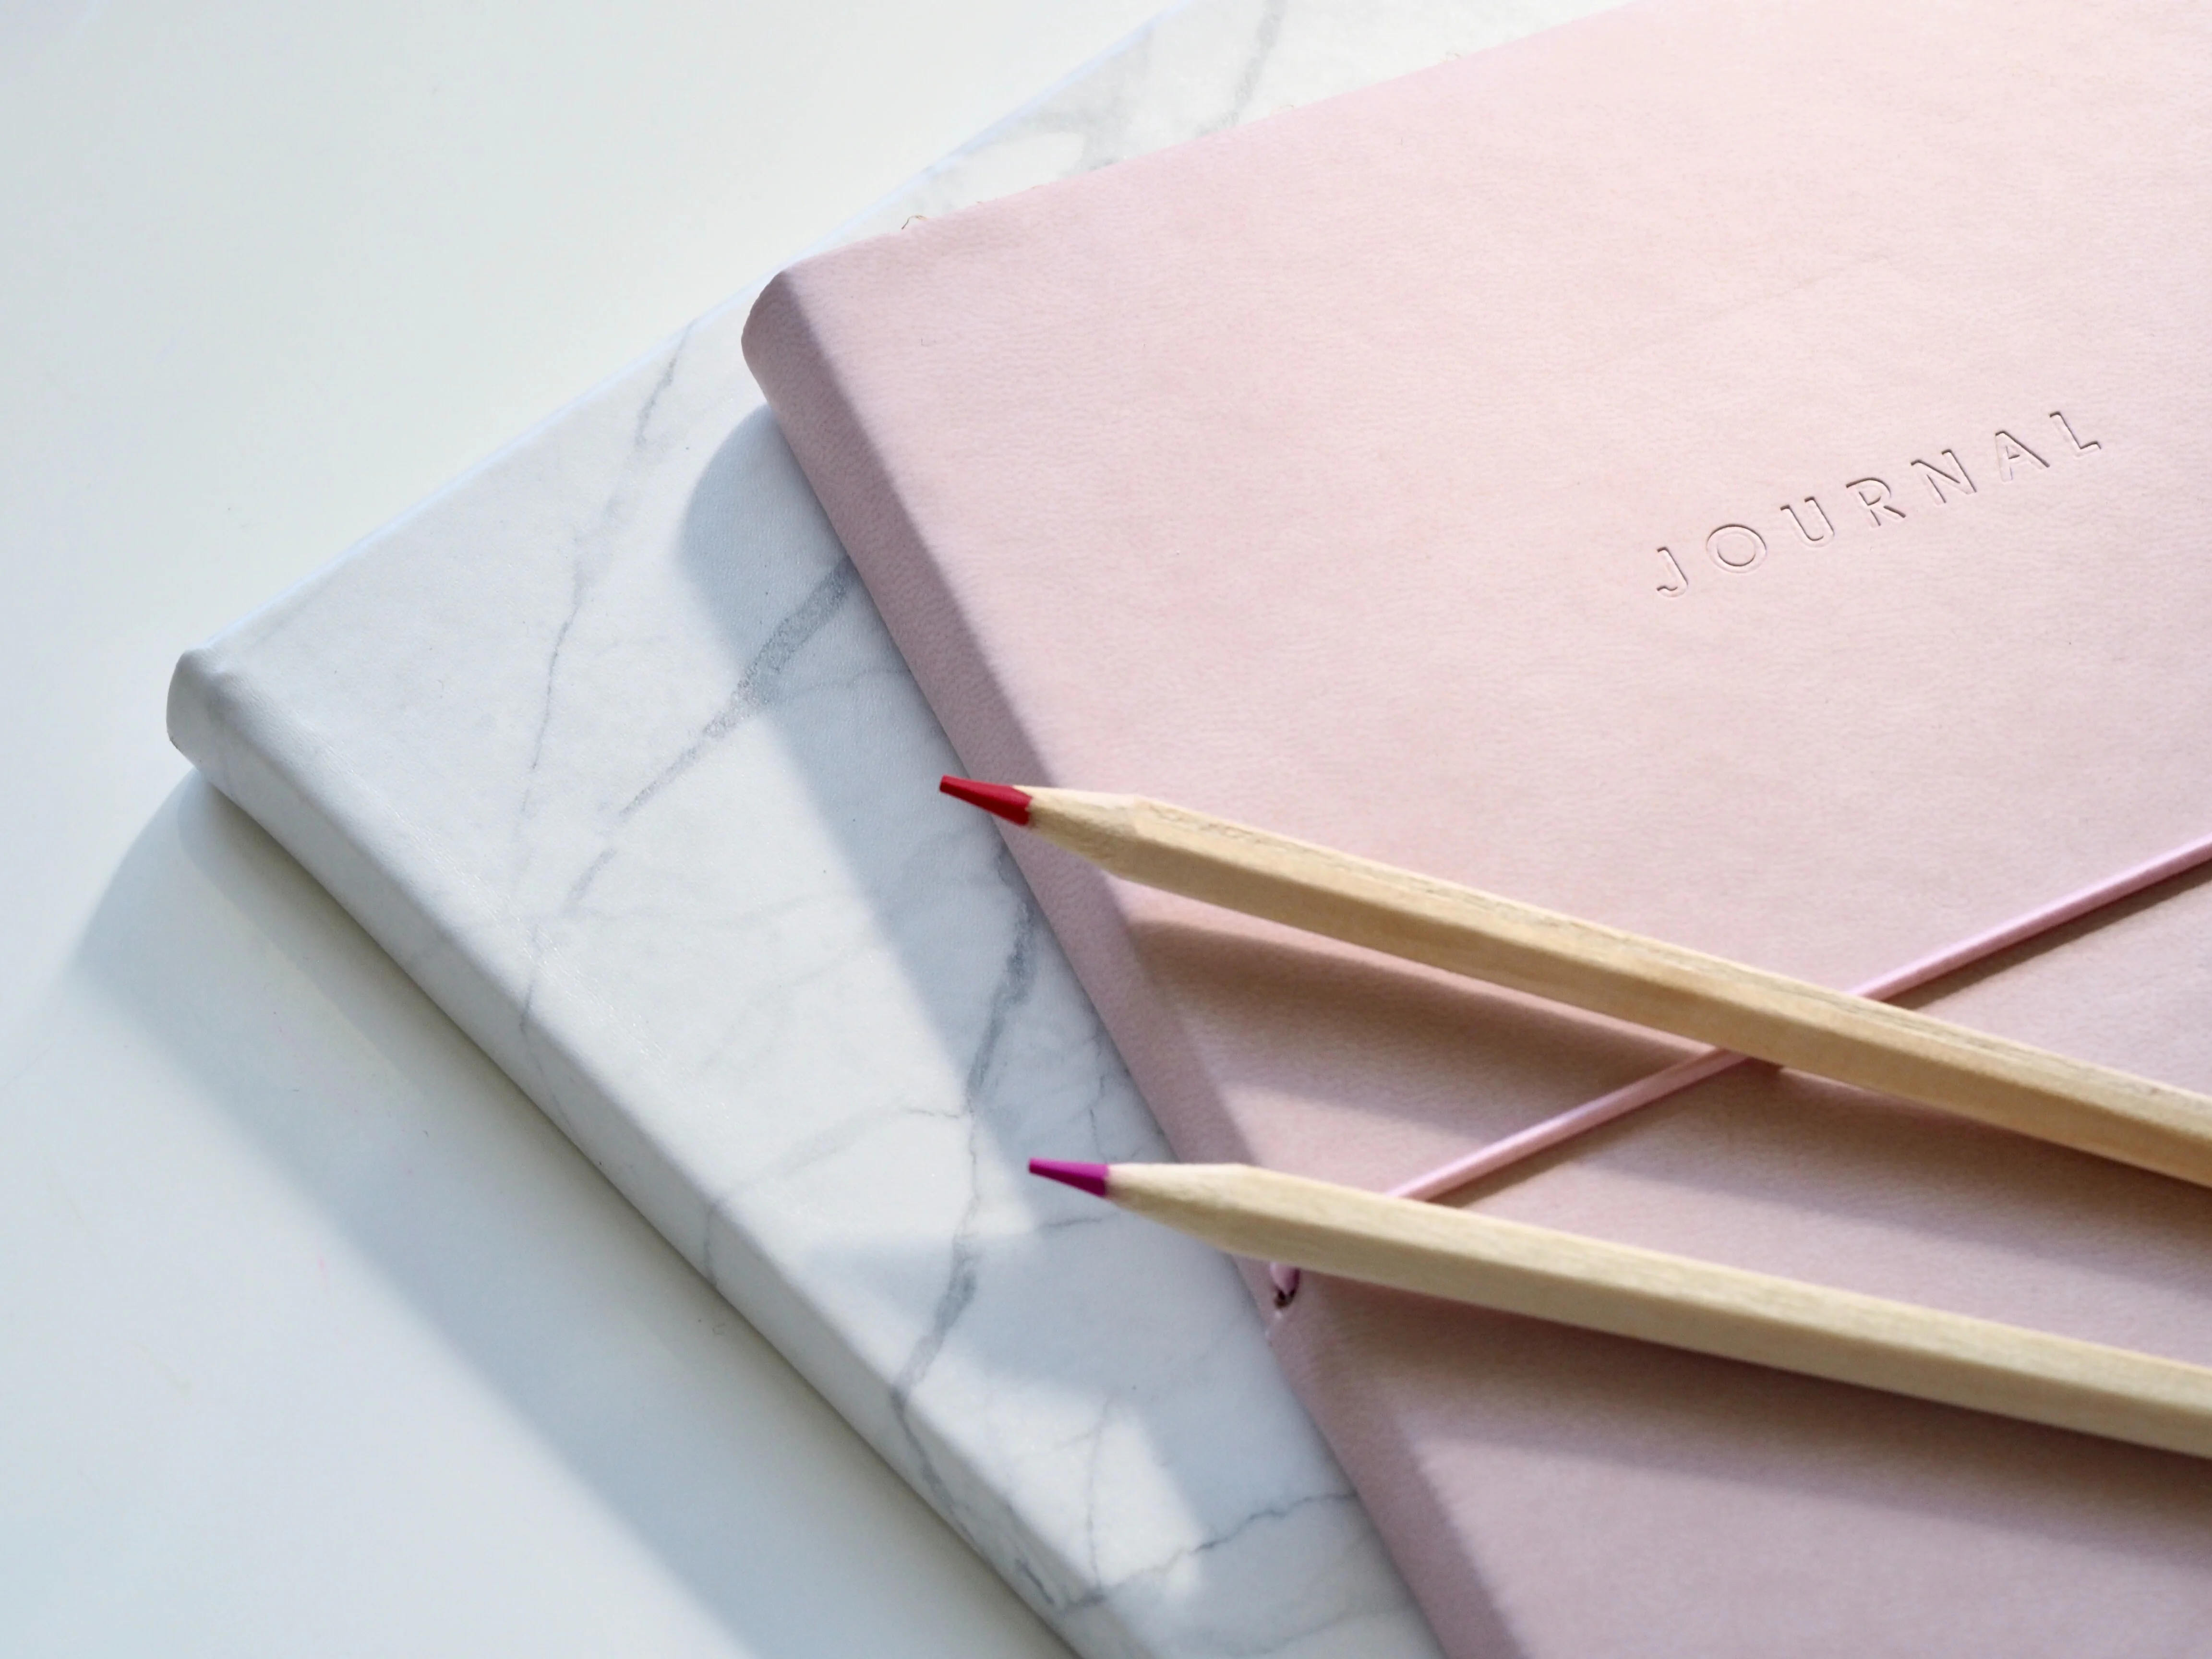 Two color pencils resting on a notebook which has &lsquo;Journal&rsquo; engraved on it.